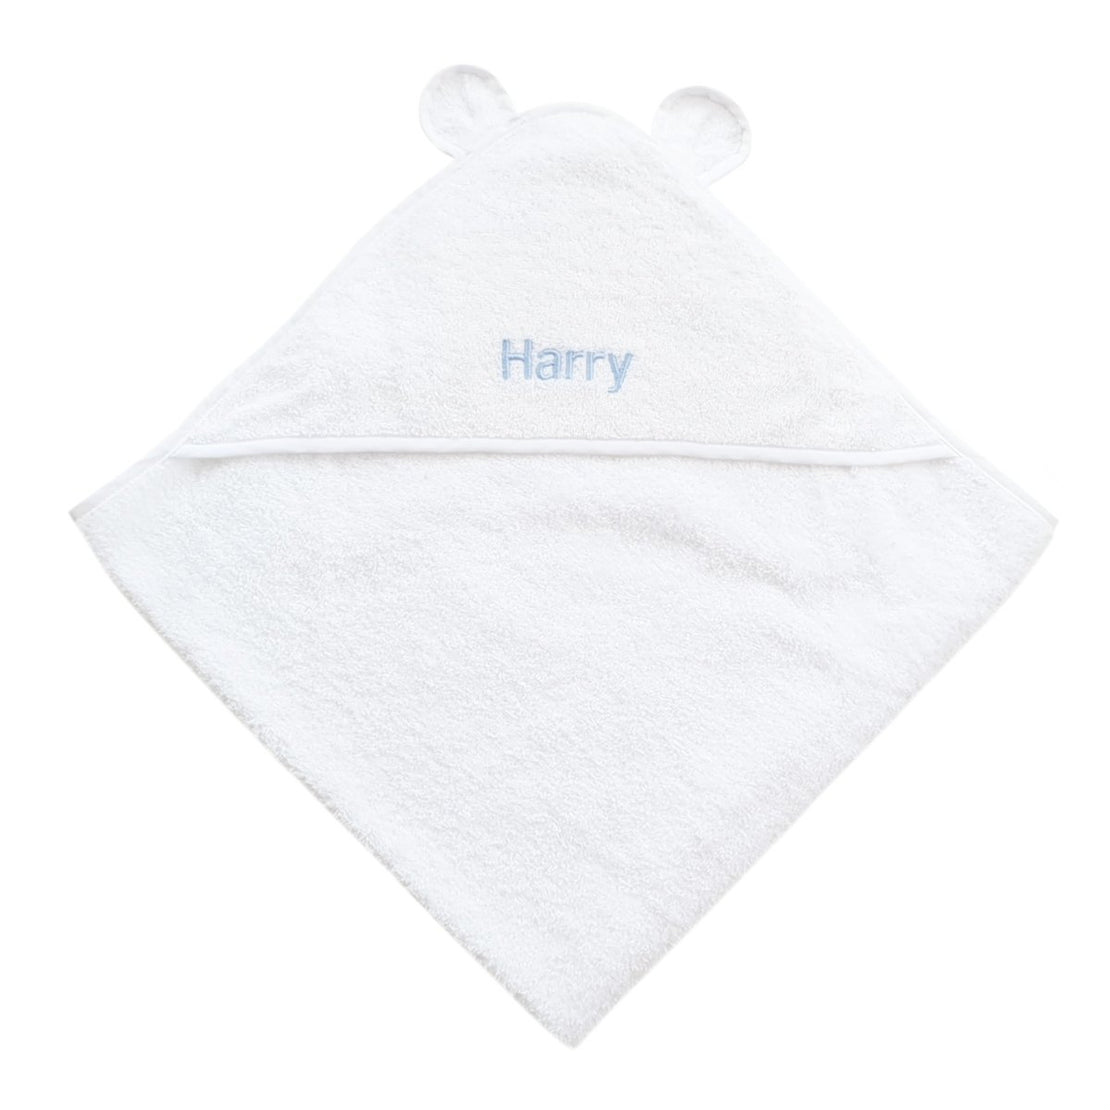 Personalised Luxury White Hooded Towel With Ears - LOVINGLY SIGNED (HK)